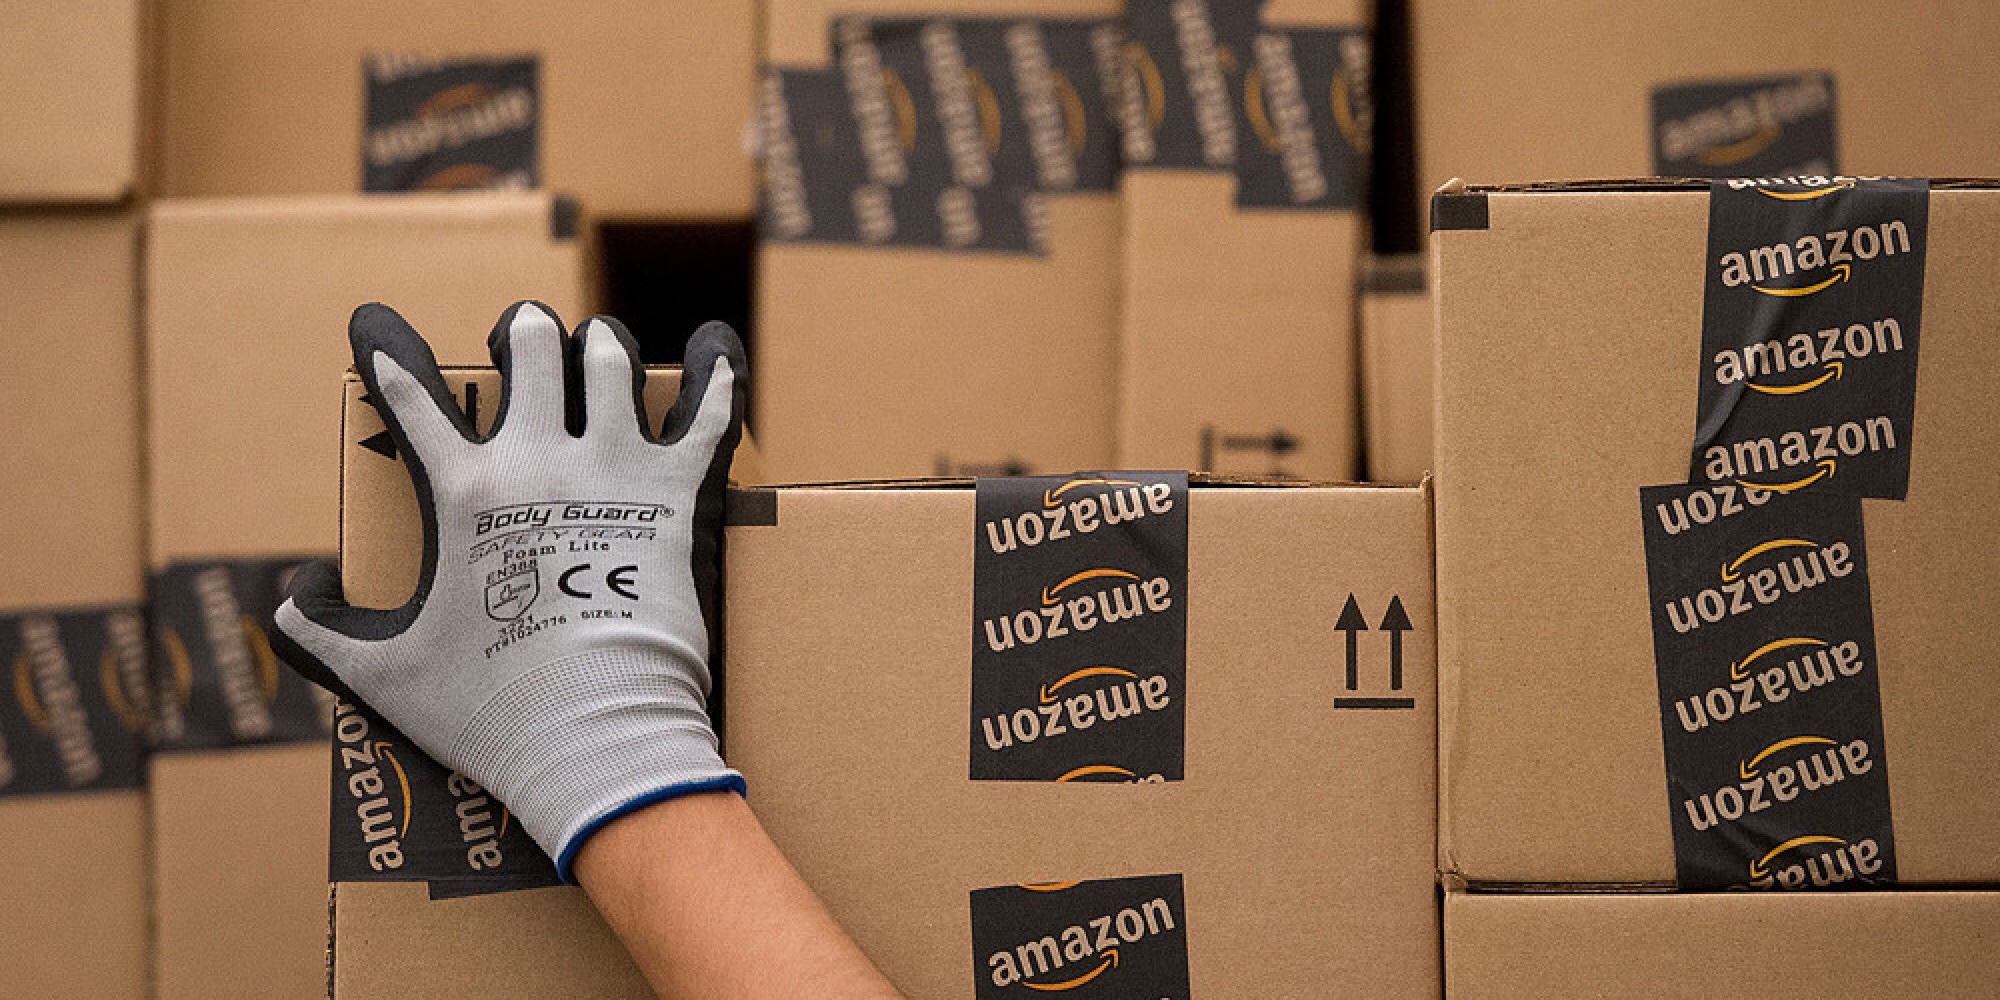 Shipping with Amazon (SWA) is the company’s answer to compete with UPS and Fedex